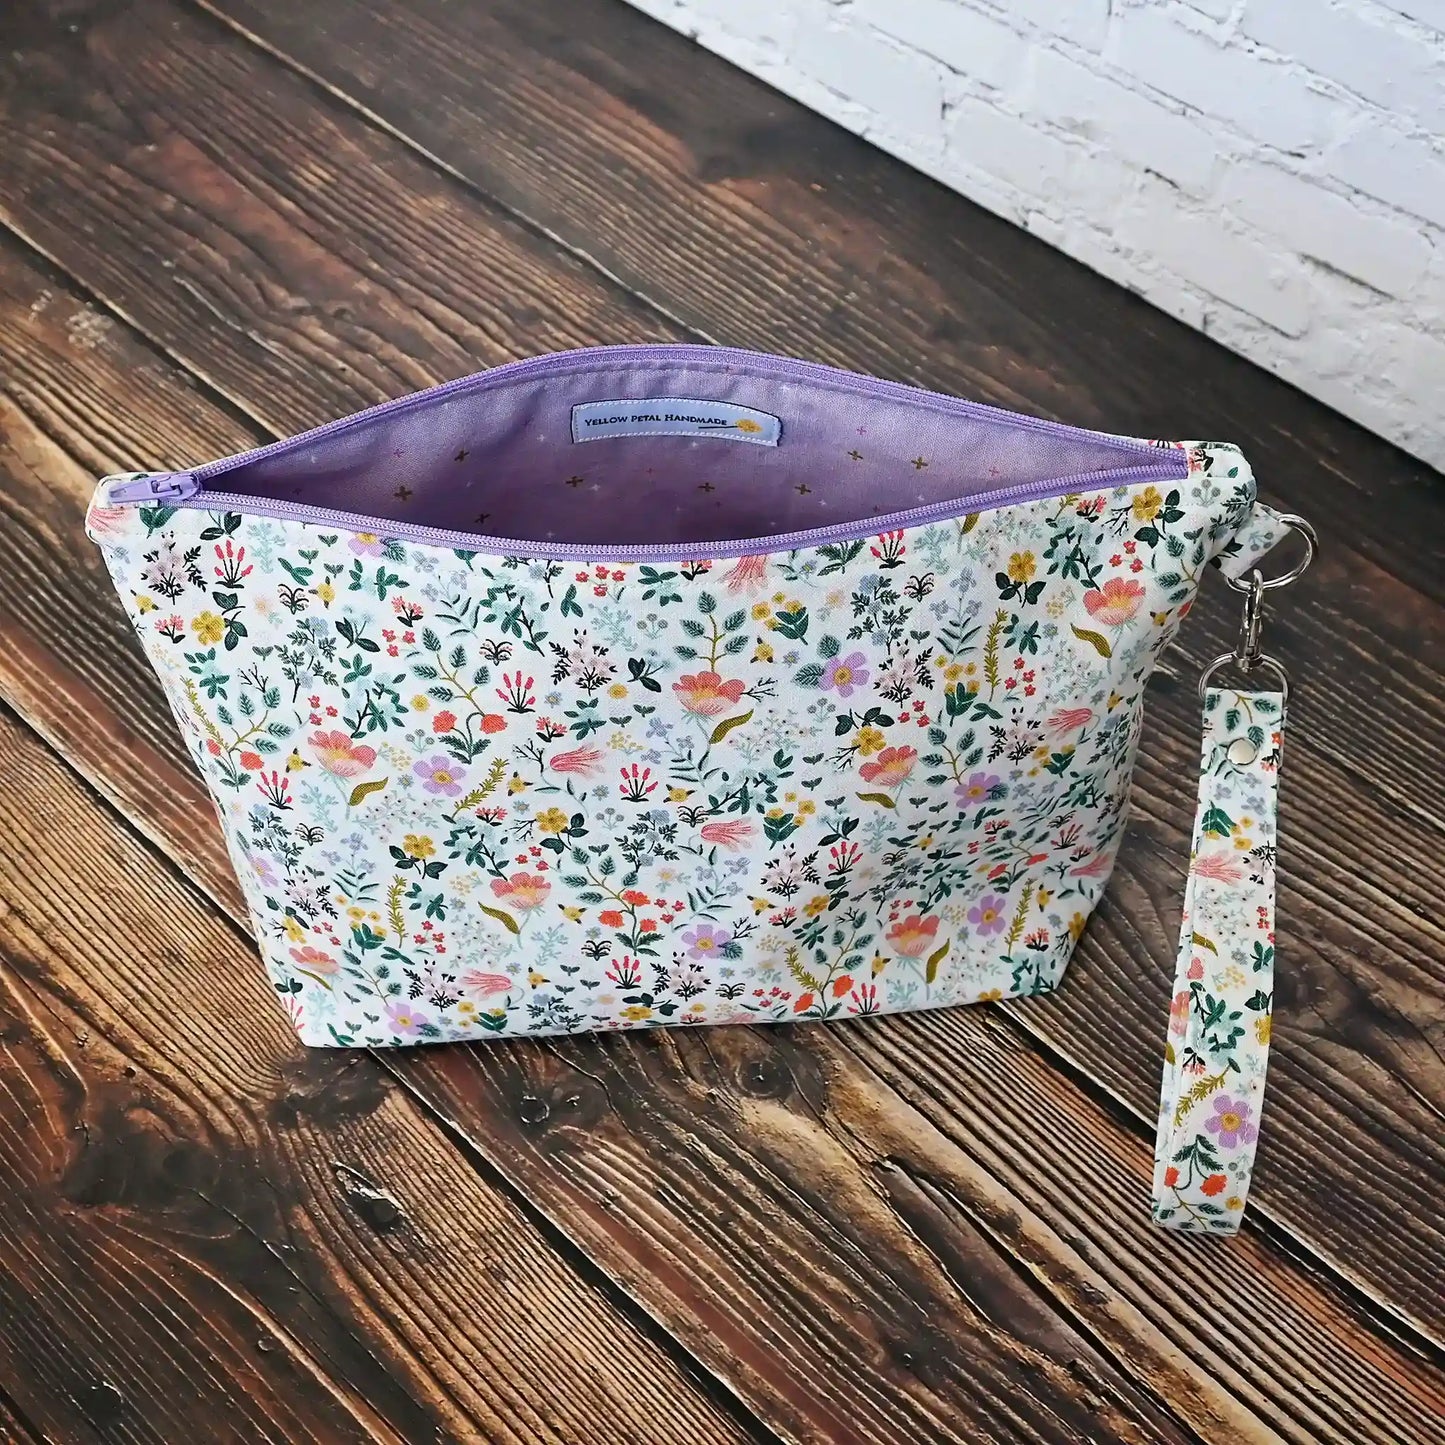 Pretty Floral Zippered Pouch in Rifle Paper Co's Curio Collection